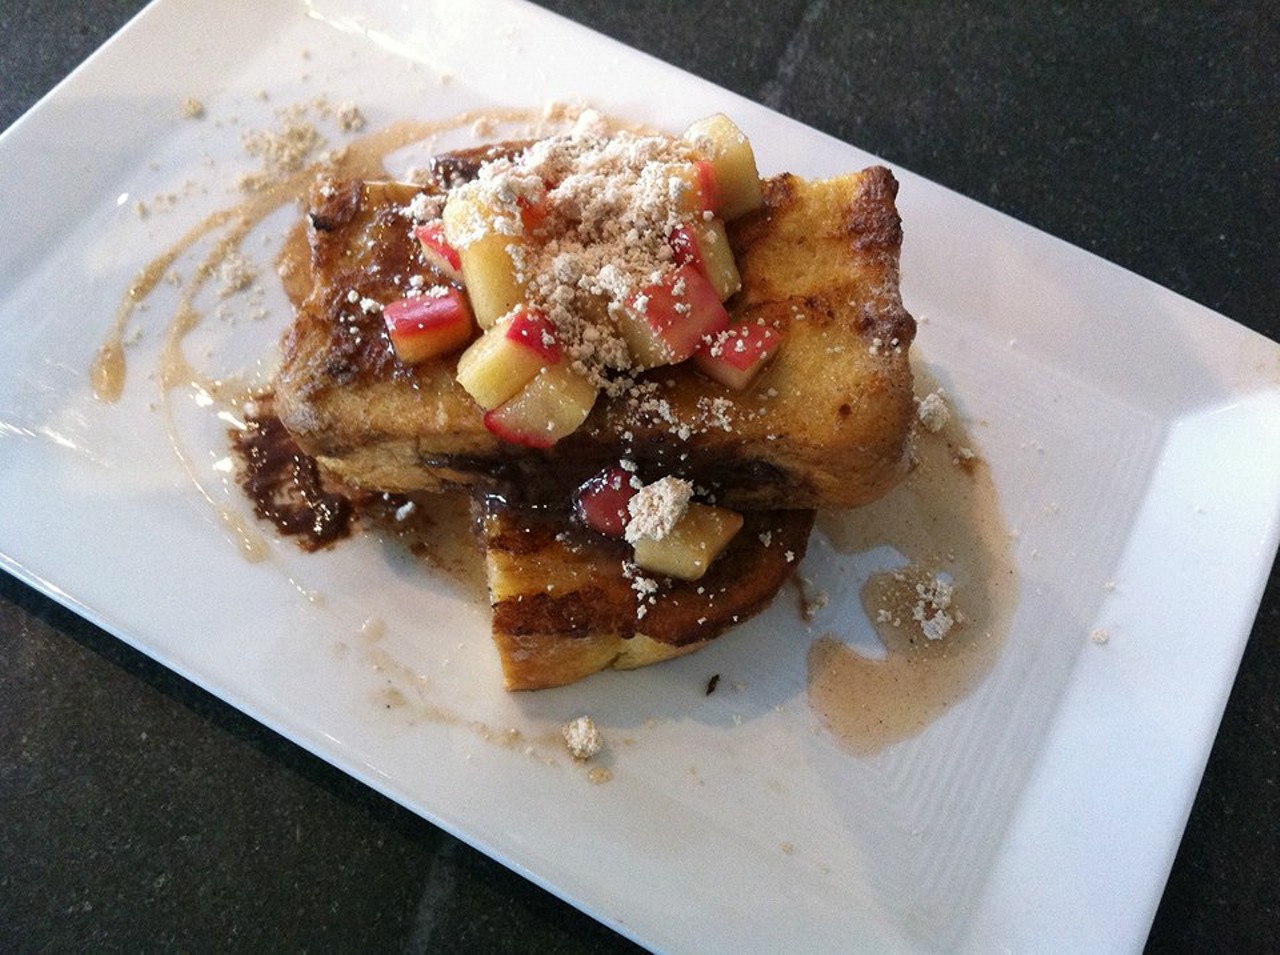 Nutella stuffed French toast. There is no need to say anything else except --go there on Sunday and eat it! Flour is located at 34205 Chagrin Blvd, Moreland Hills. Call 216-464-3700 or visit
flourrestaurant.com for more information.